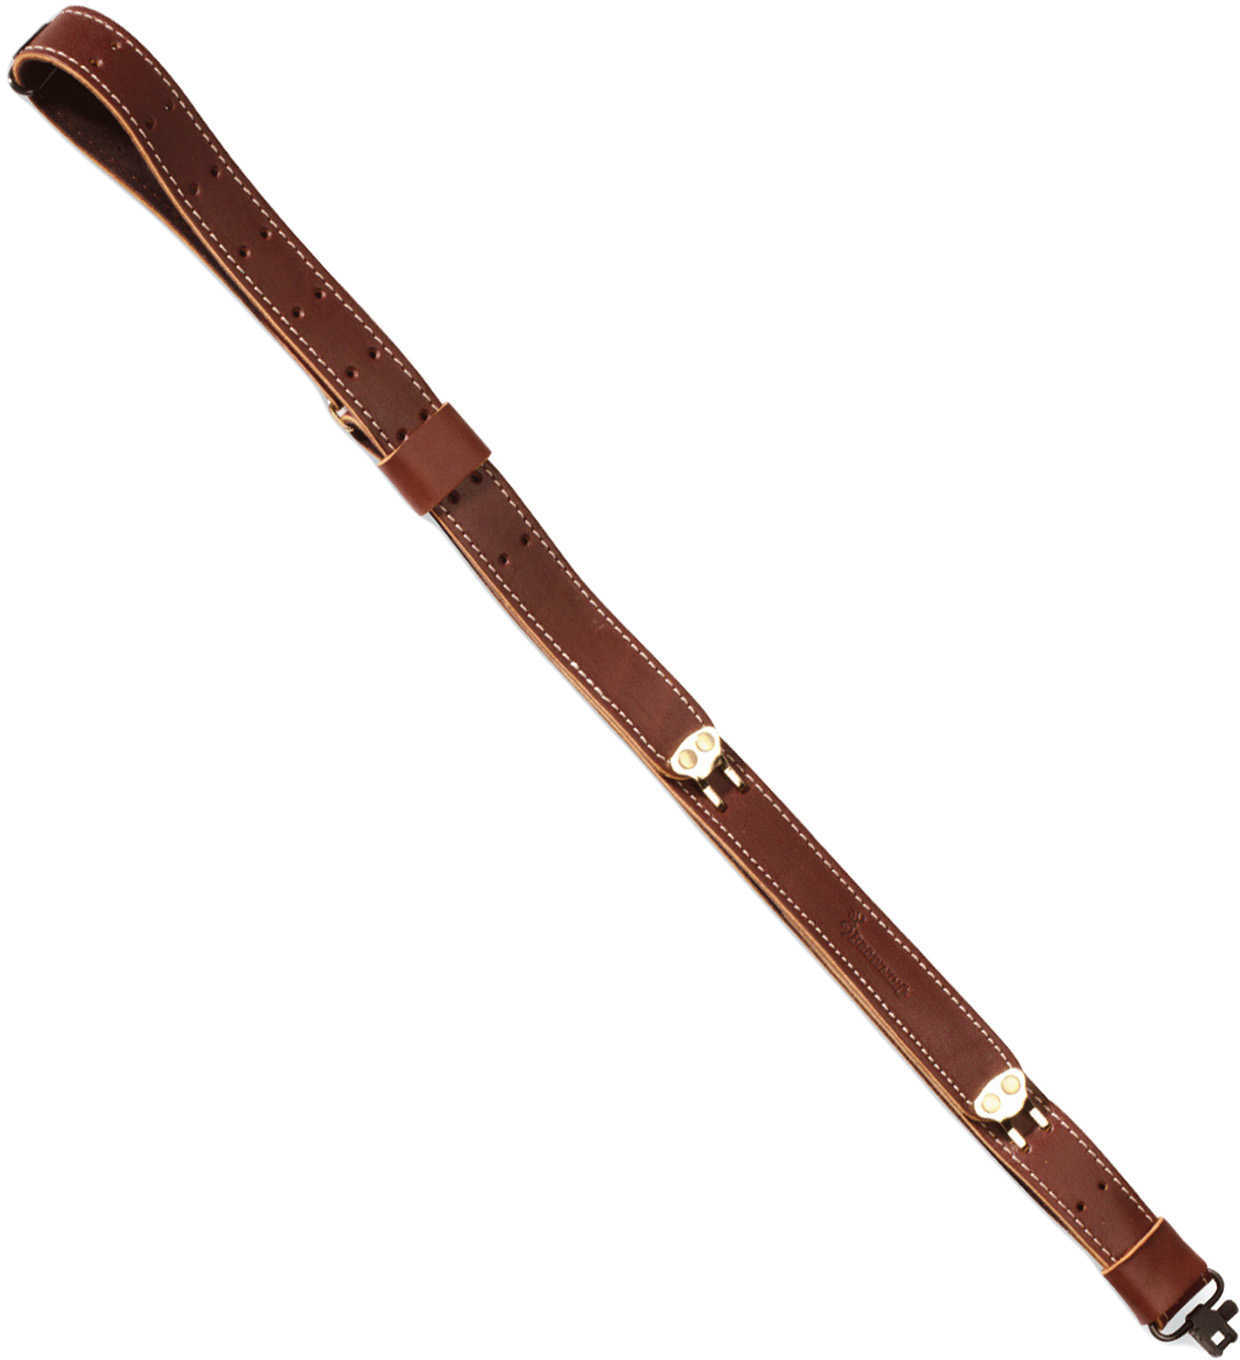 Browning Leather Latigo Sling, Military Style with Swivels 12244